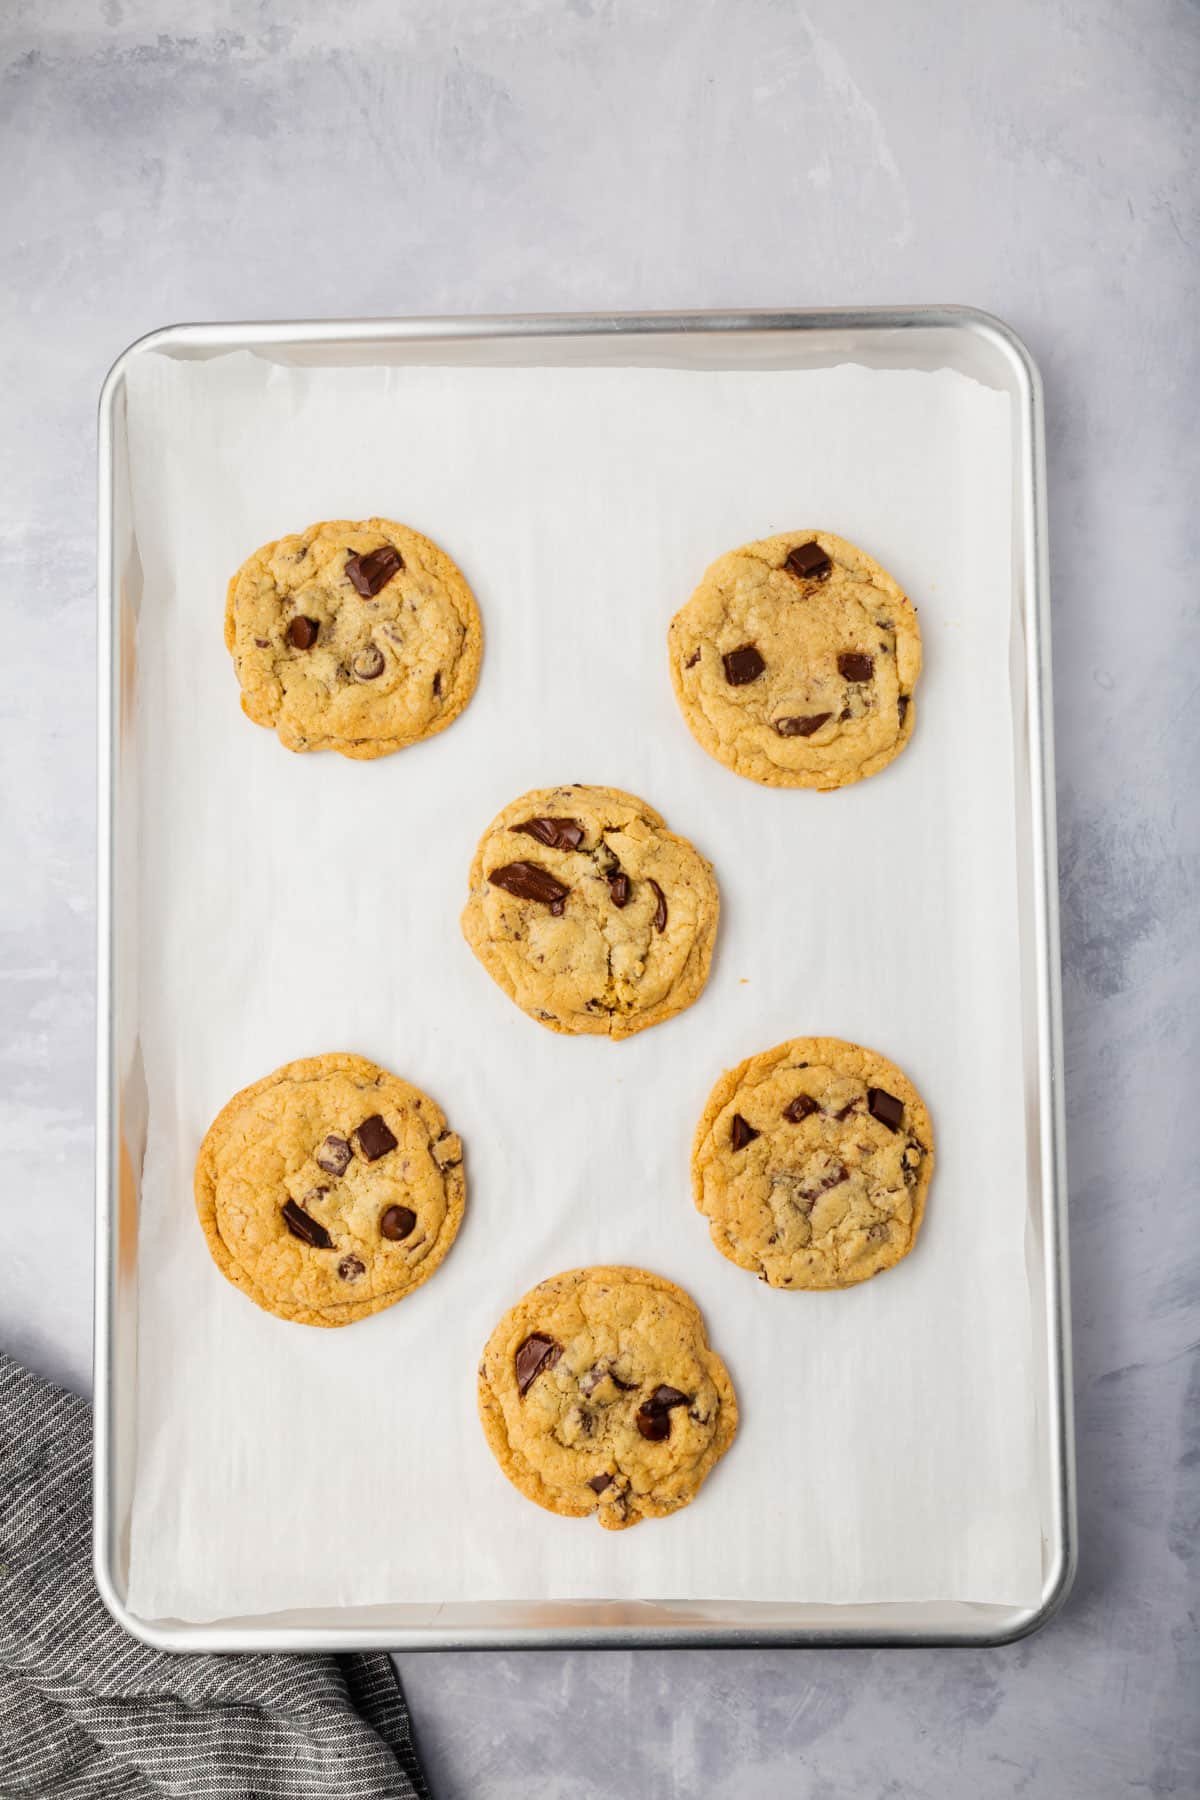 Six gluten-free chocolate chip cookies on a baking sheet lined with parchment paper.